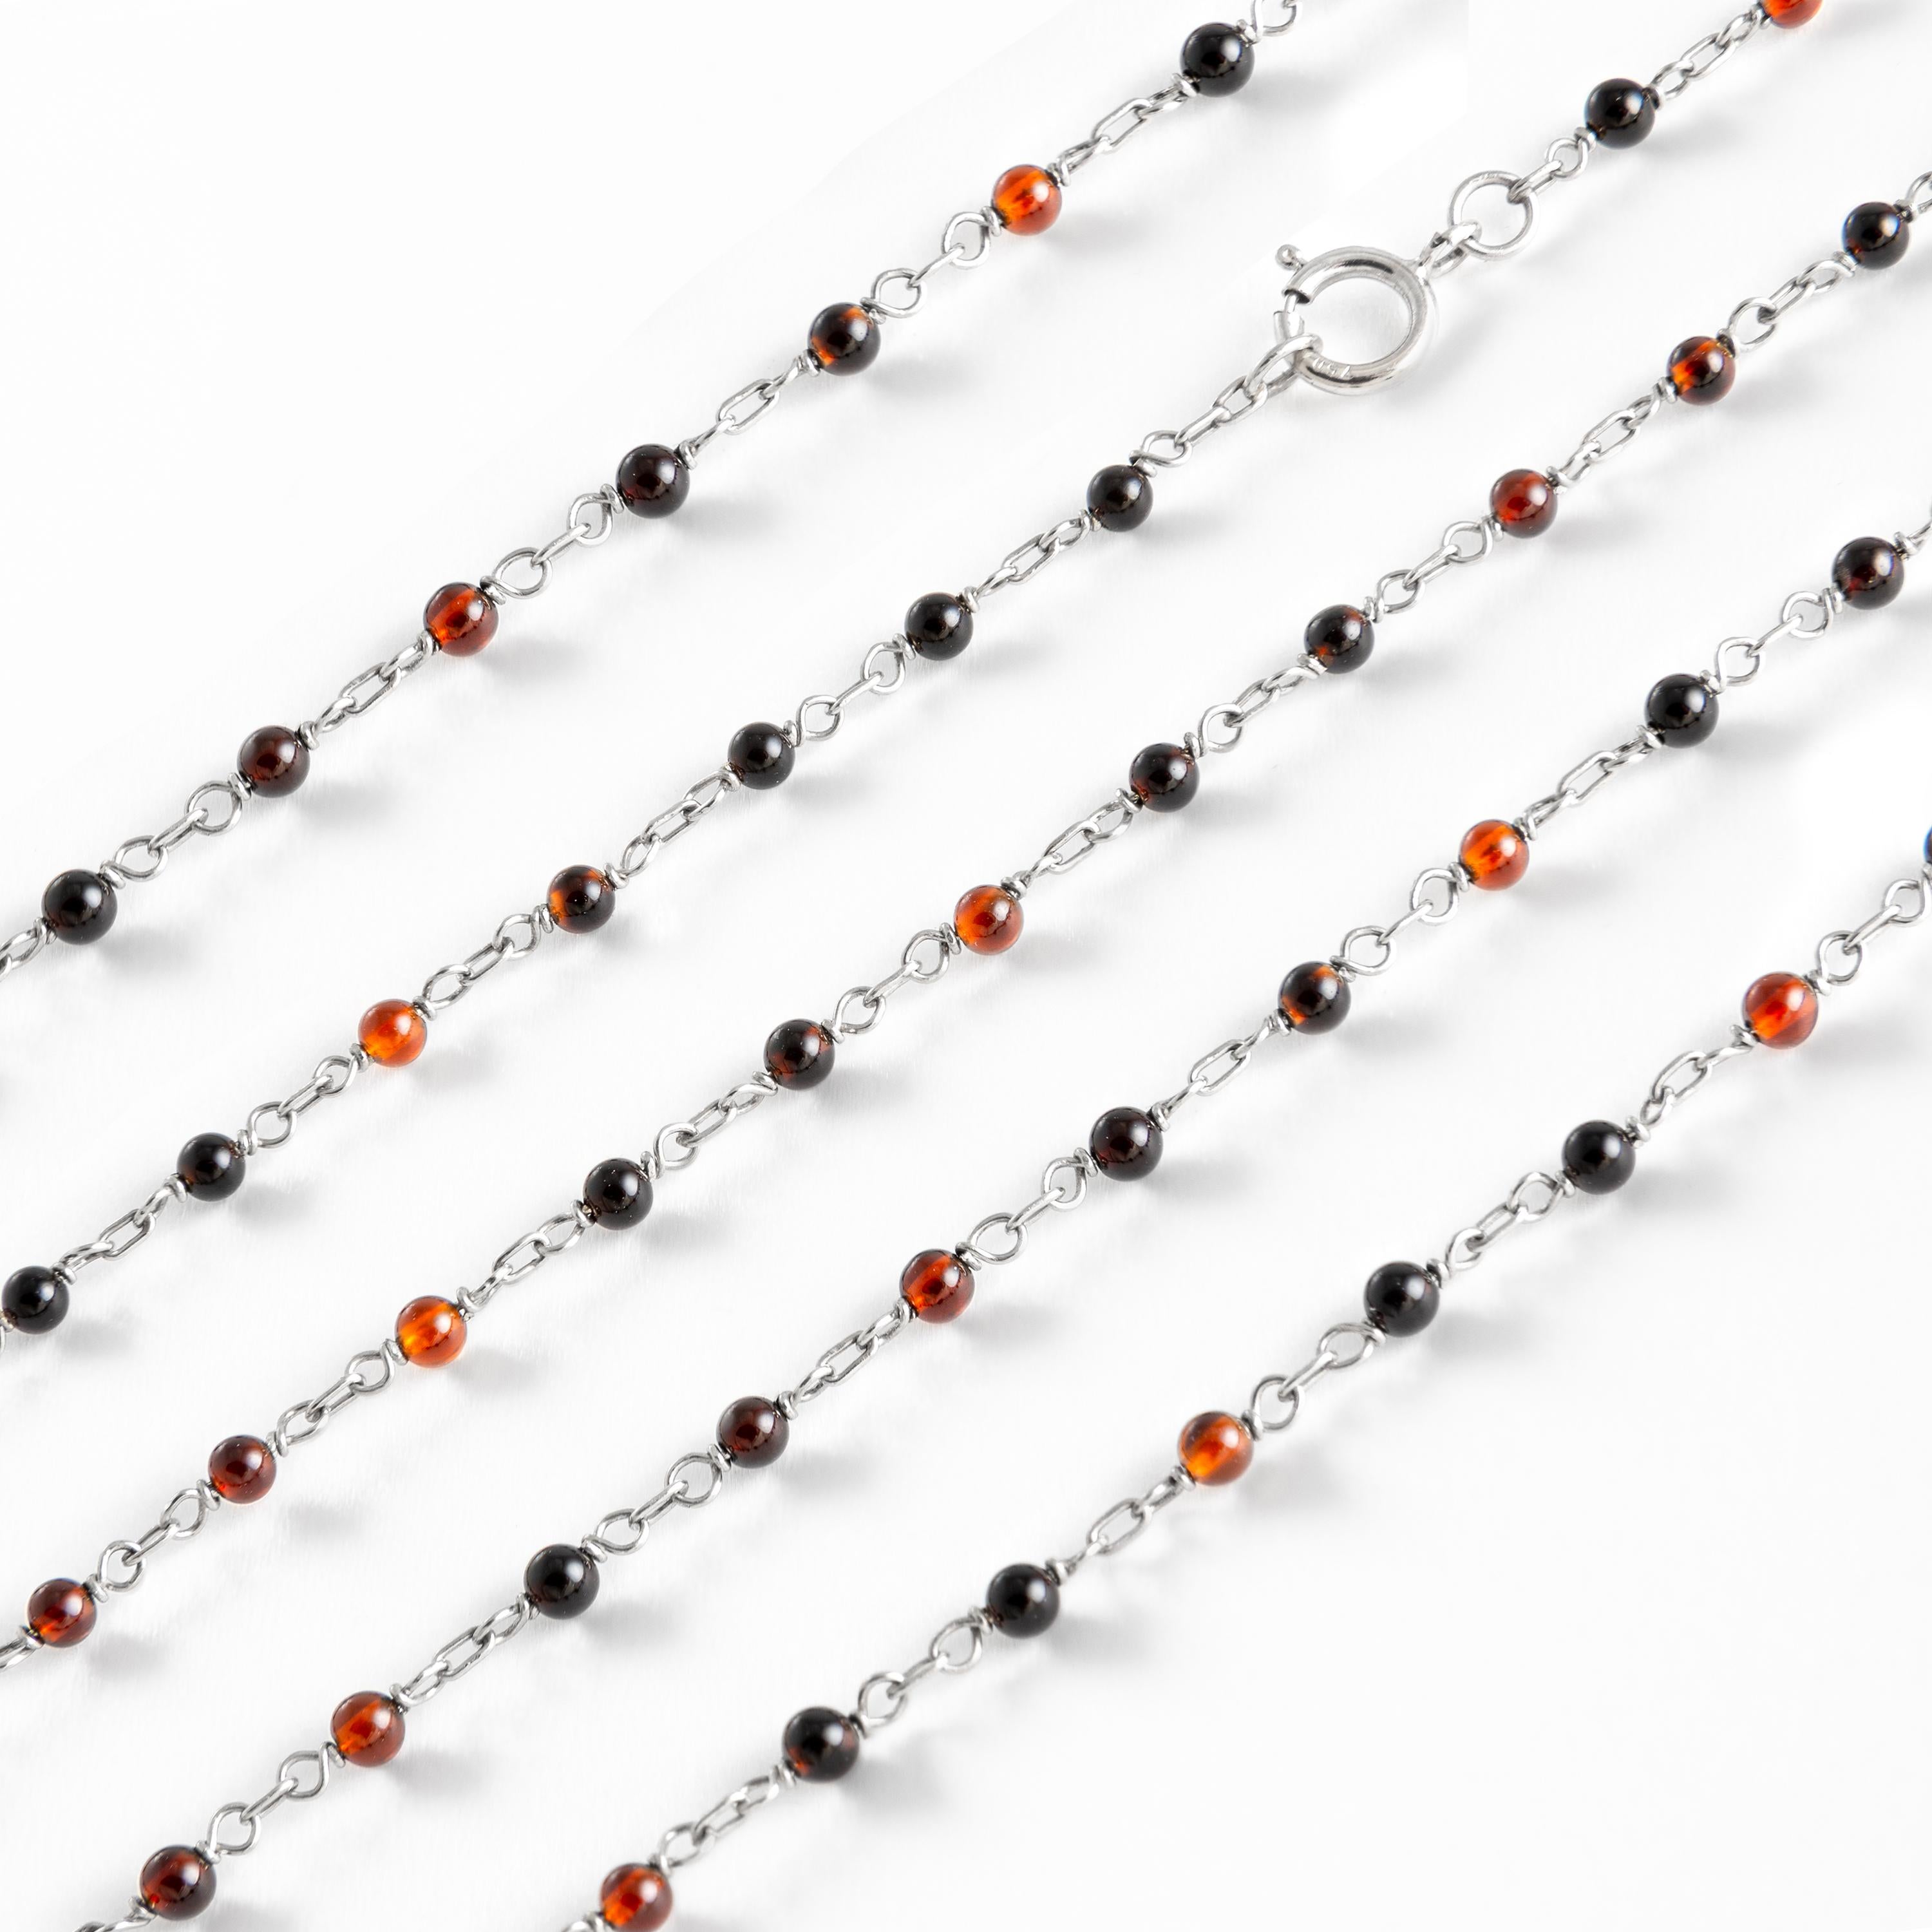 Sautoir Onyx Beads on Silver 925 Necklace.

Length: approximately 39.37 inches (100.00 centimeters).